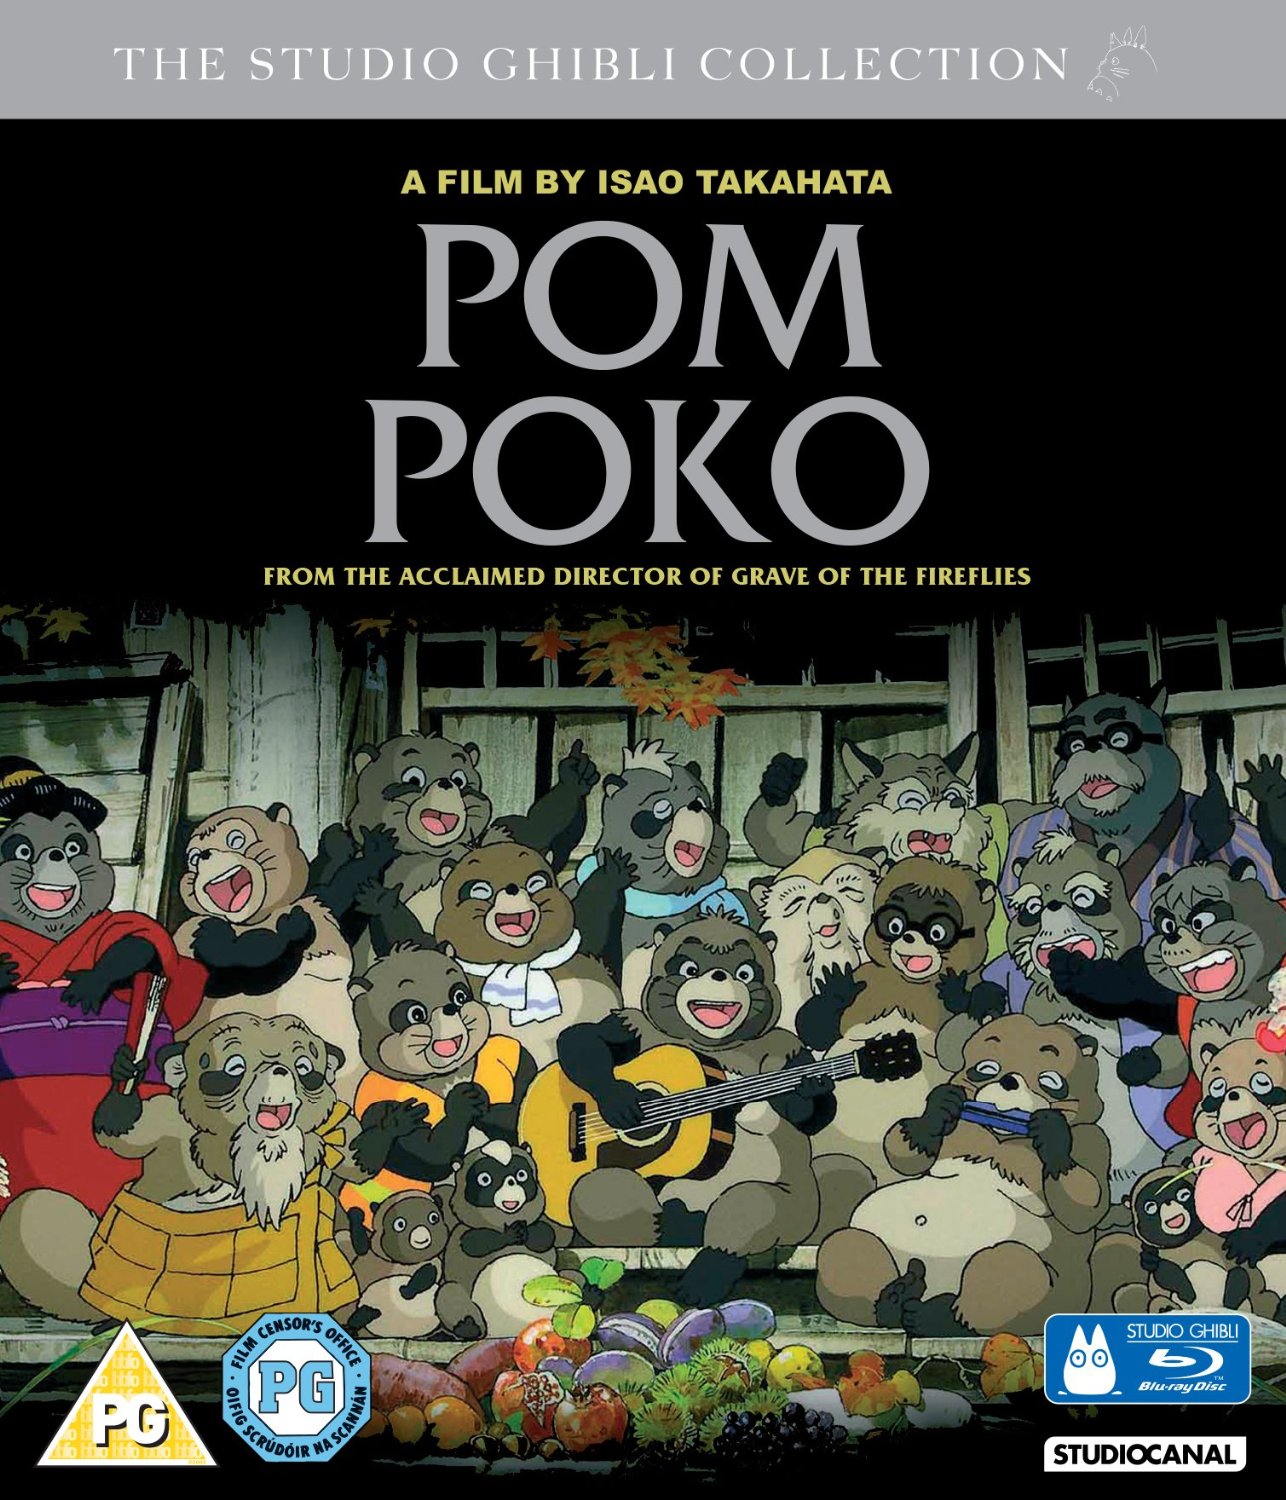 boom competitions - win a copy of Pom Poko on Blu-ray